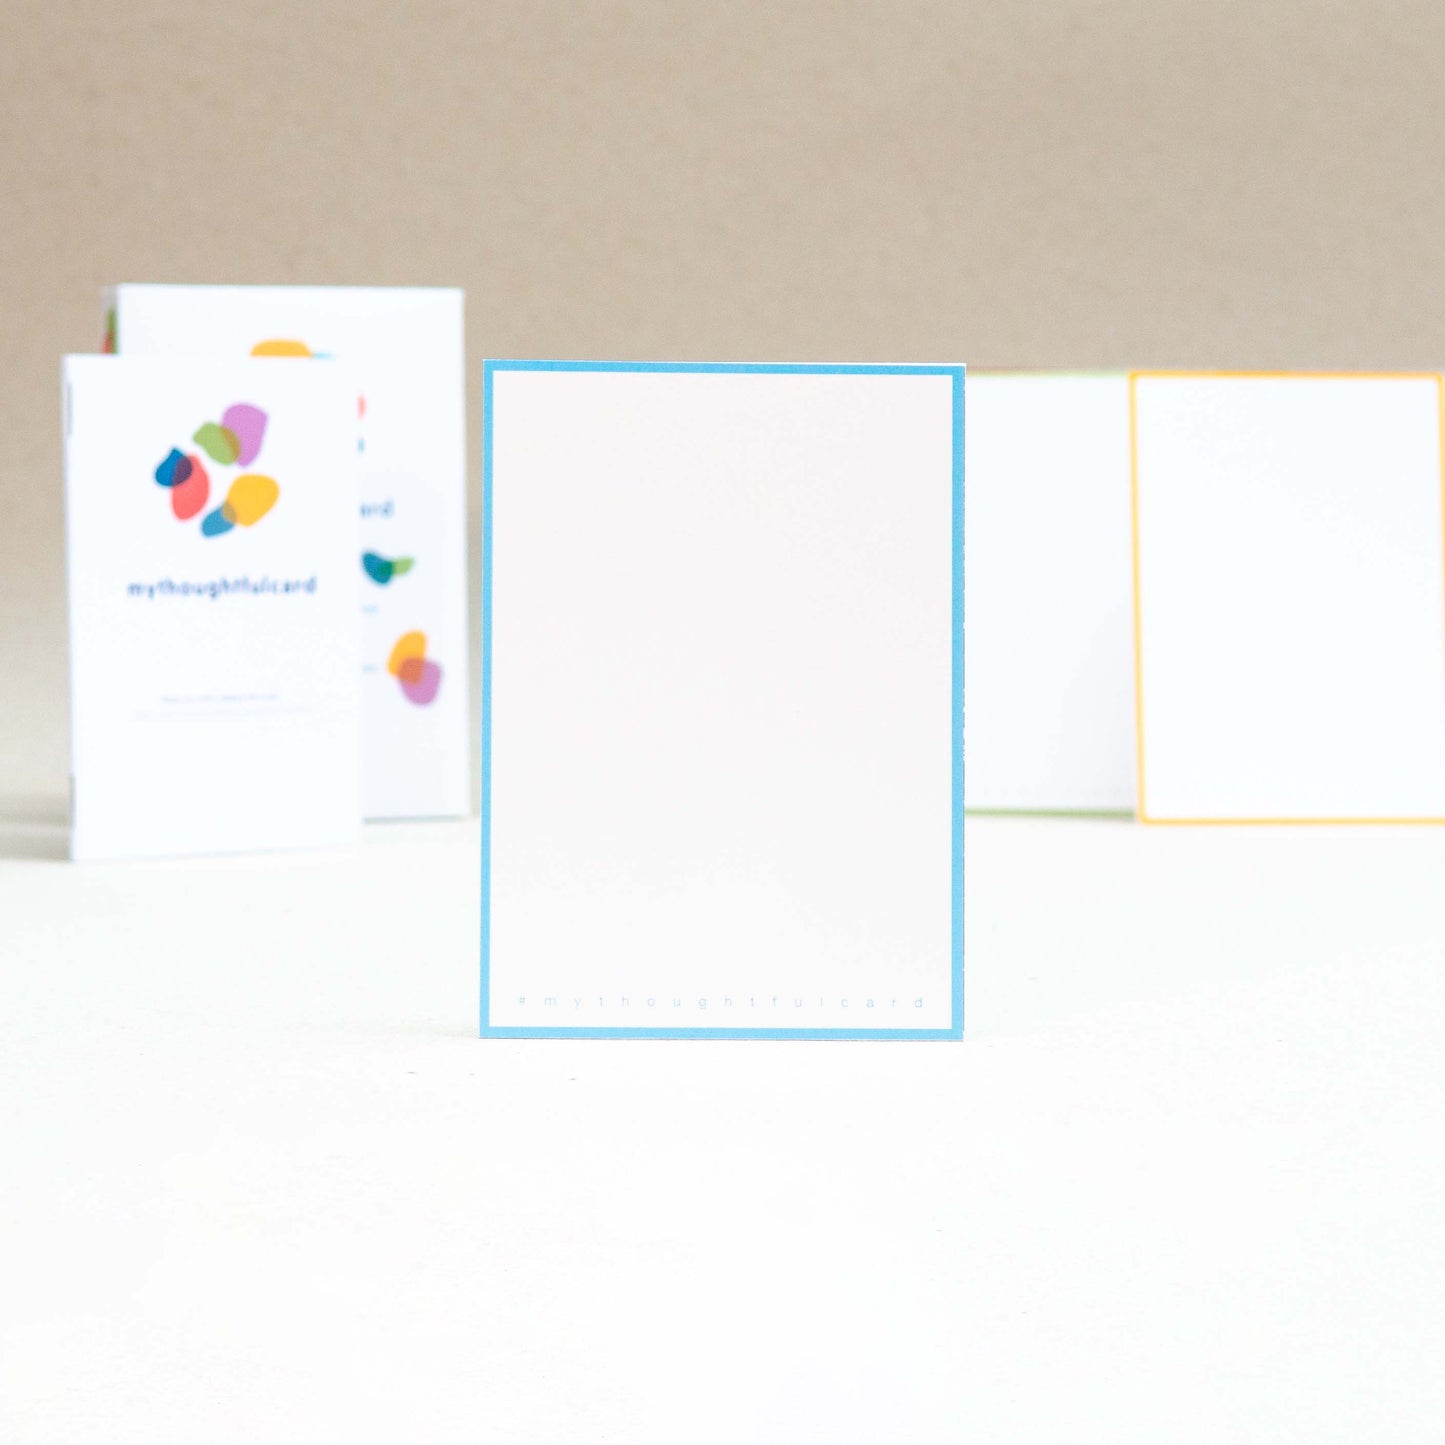 My Thoughtful Card - Pack of 6 cards